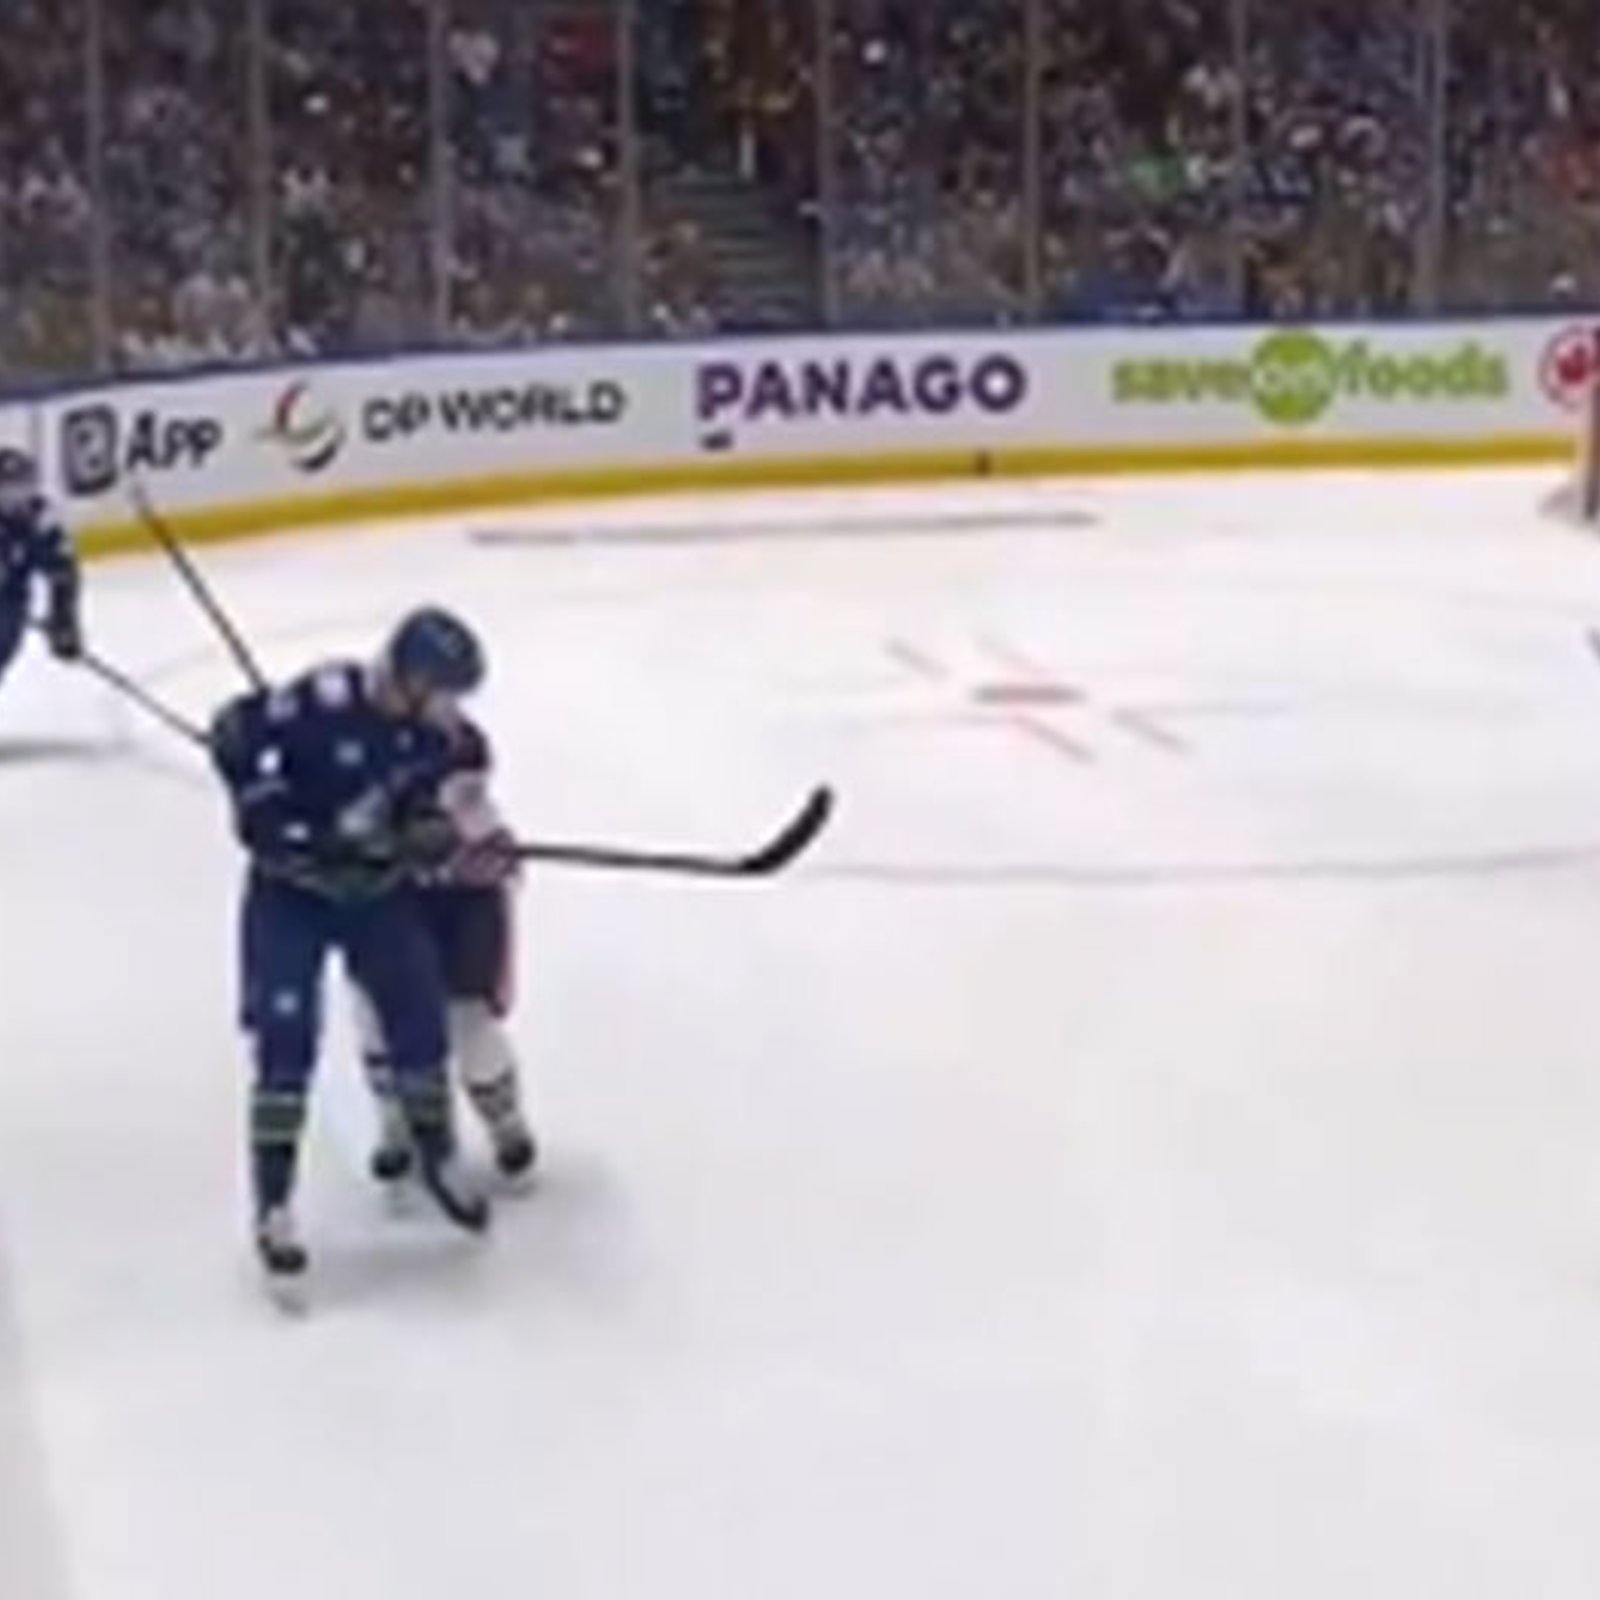 Canucks fans litter the ice with garbage after an absolutely brutal call from the refs